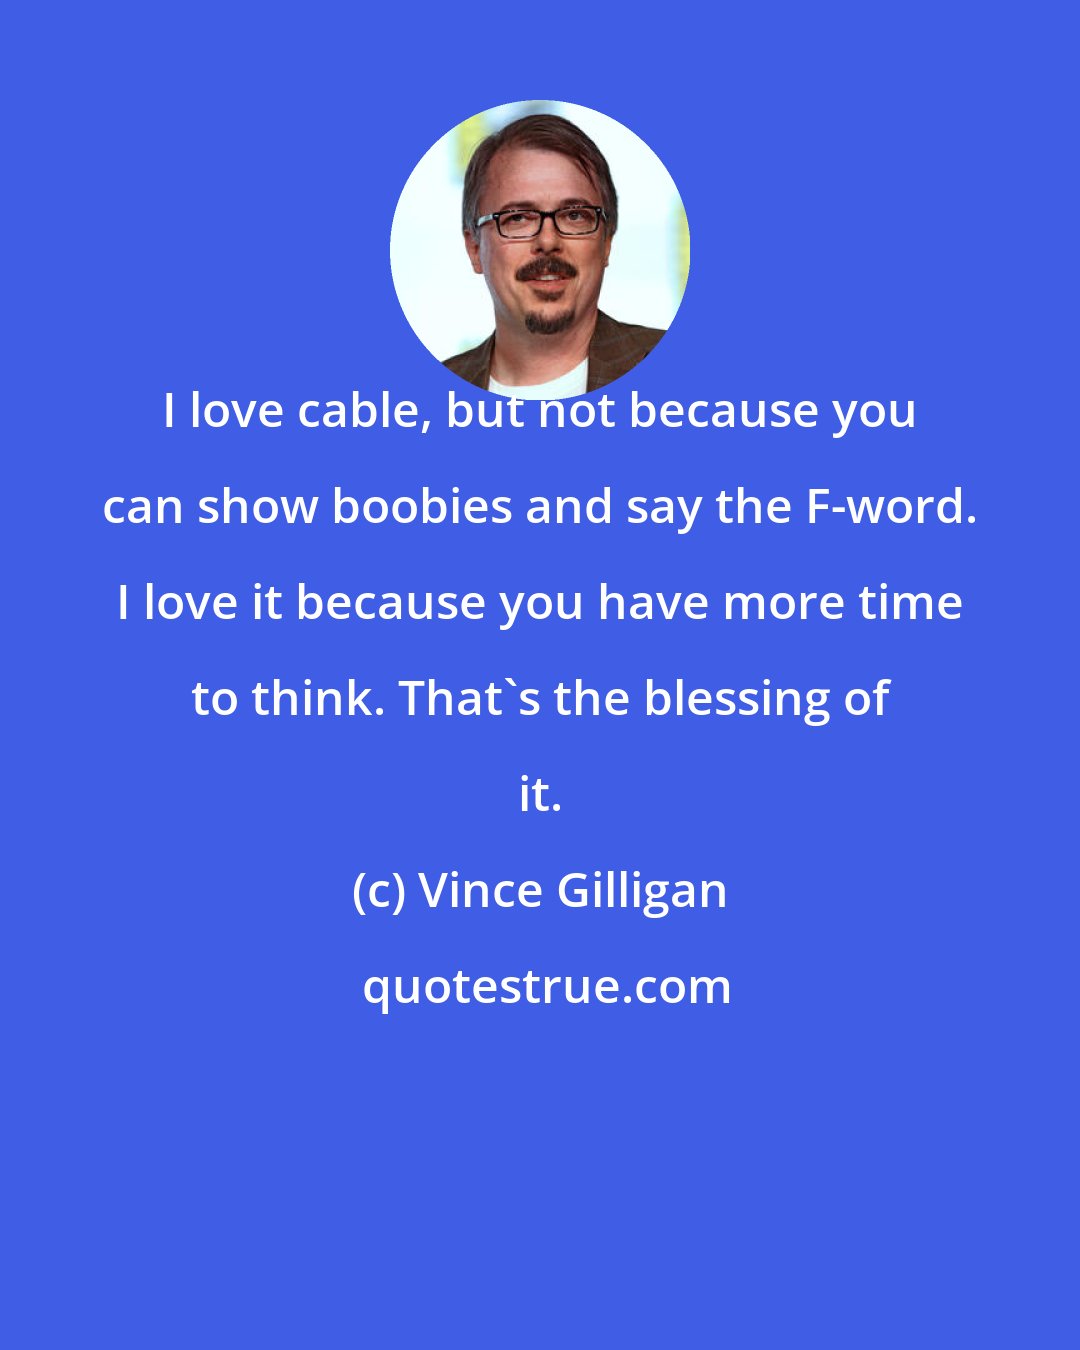 Vince Gilligan: I love cable, but not because you can show boobies and say the F-word. I love it because you have more time to think. That's the blessing of it.